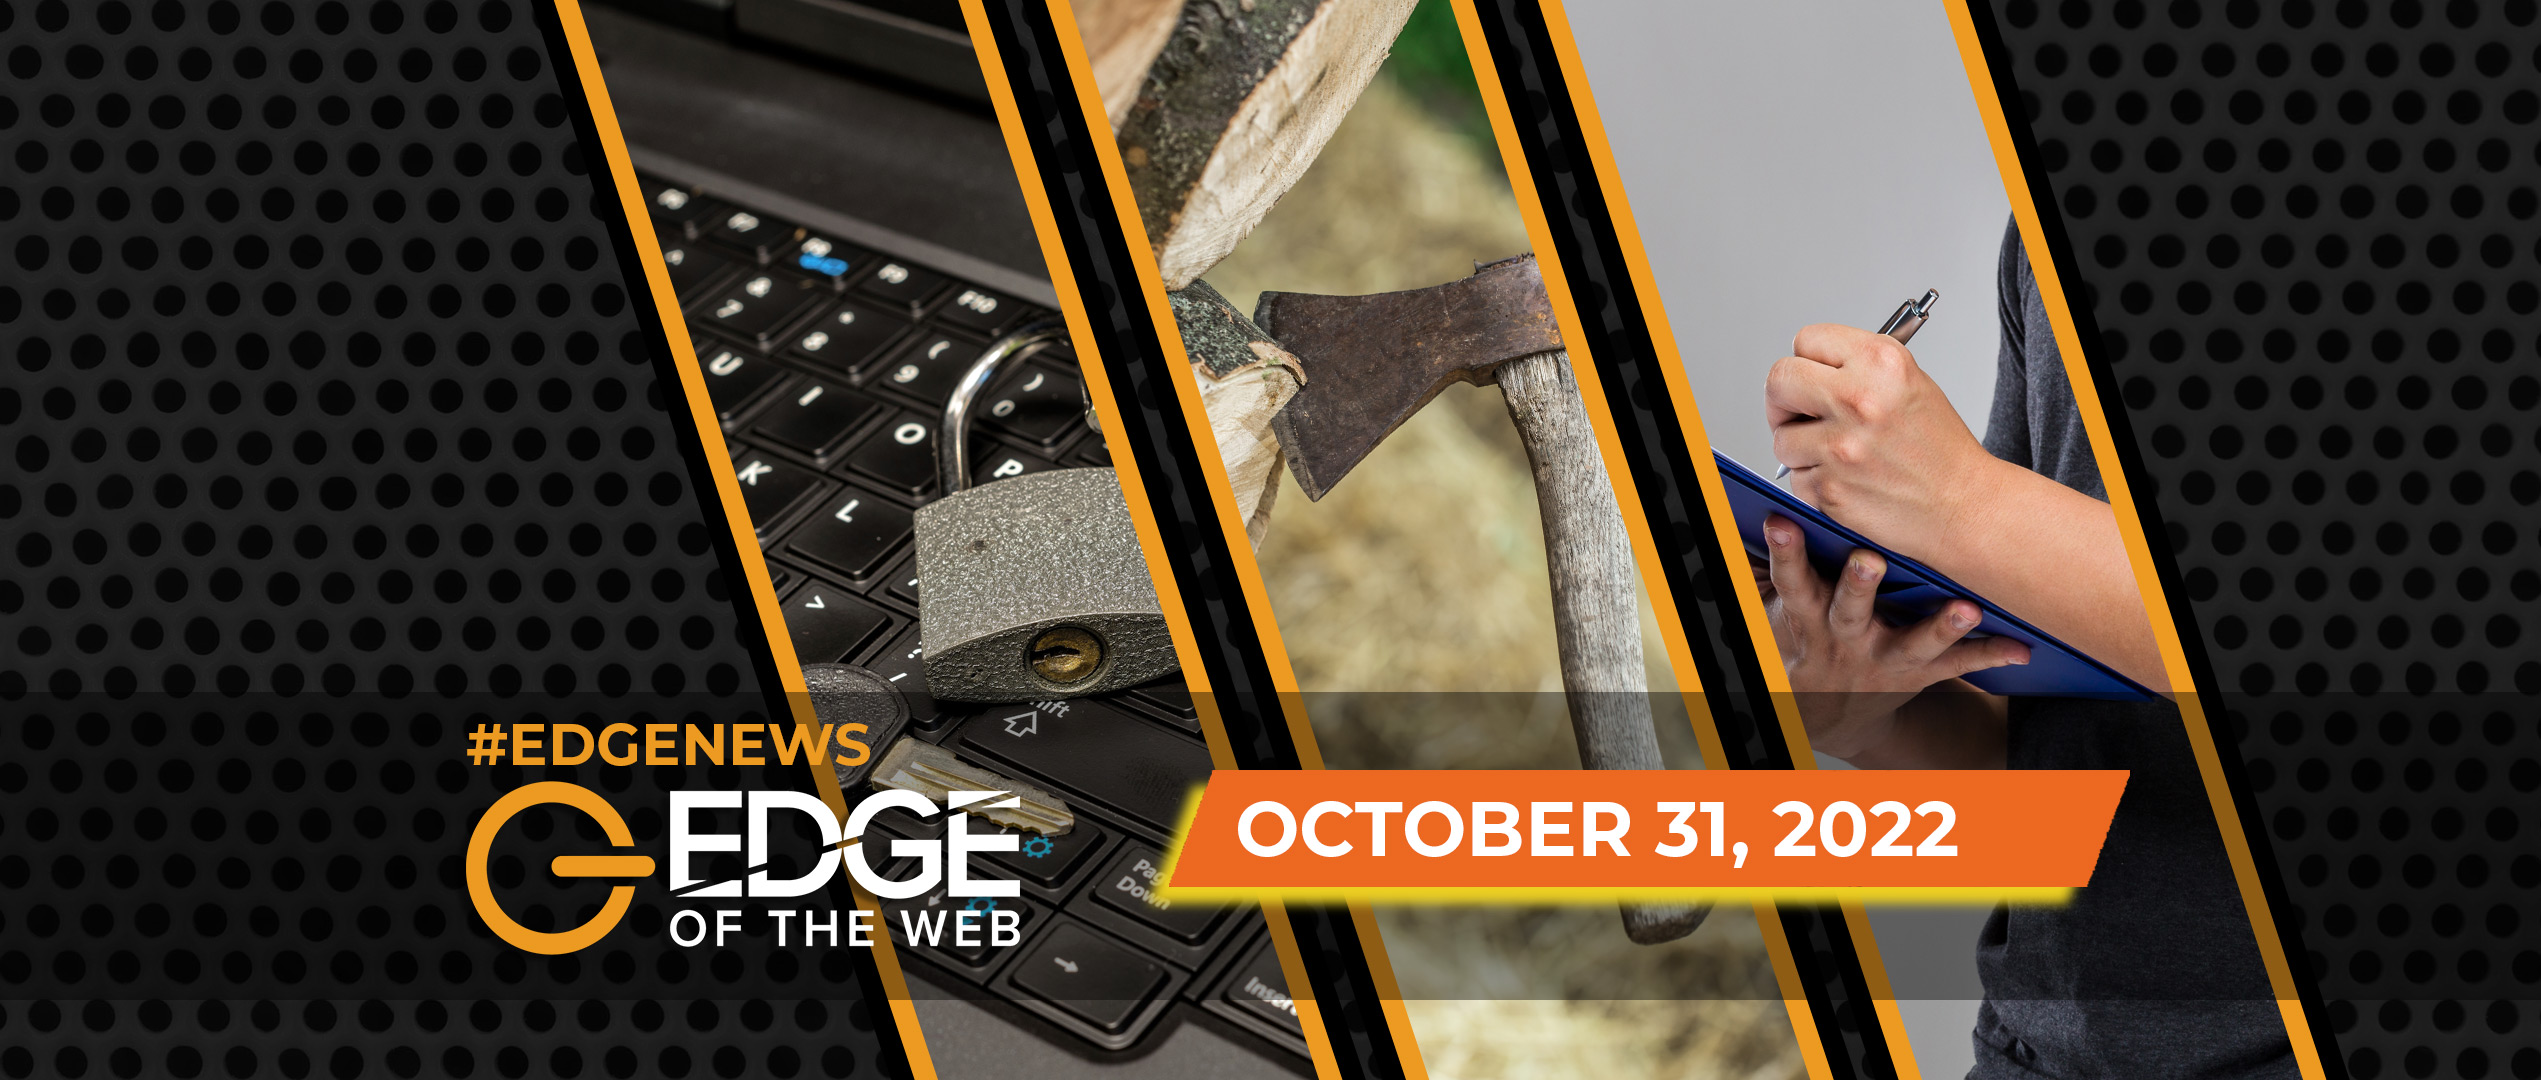 542 | News from the EDGE | Week of 10.31.2022